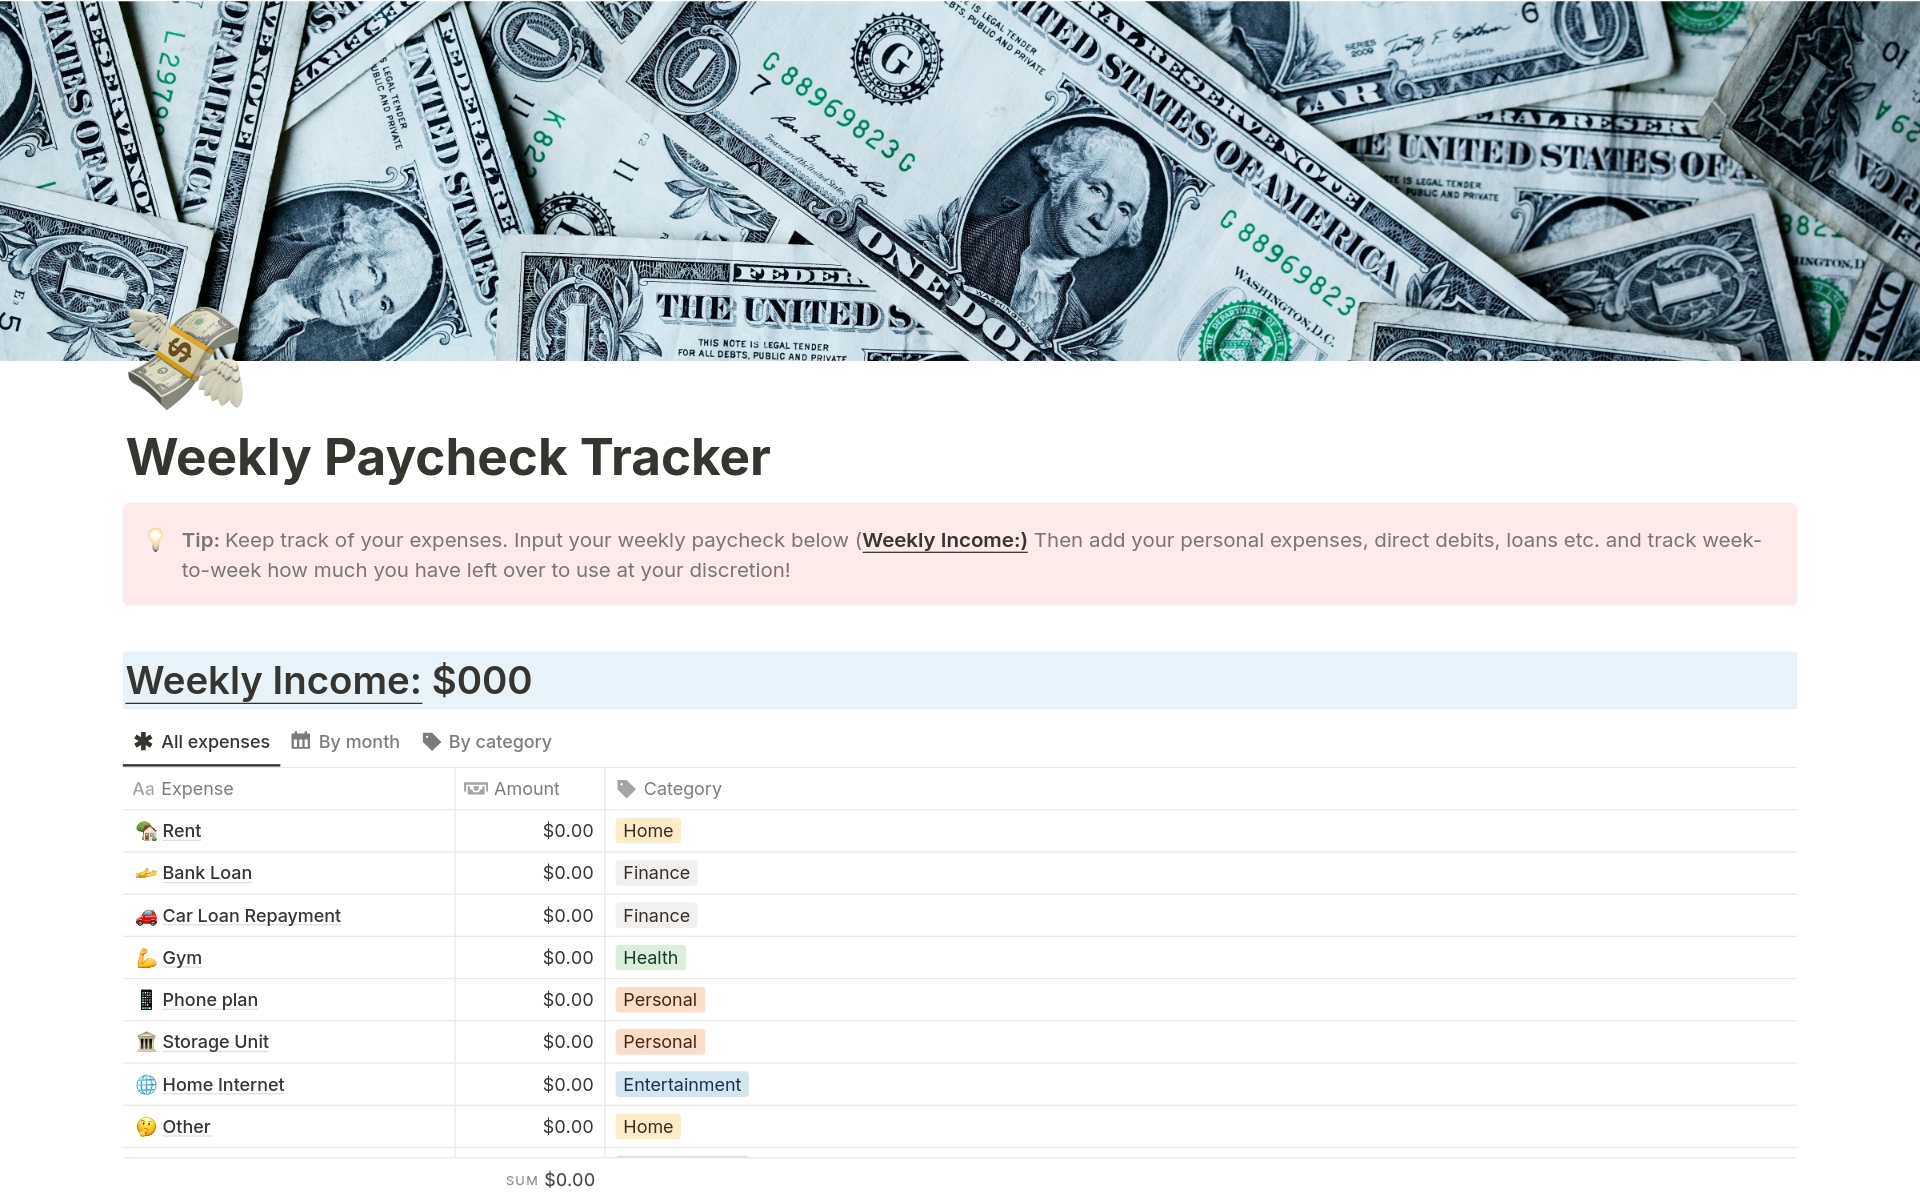 Track your weekly paycheck, bills, direct debits and get an amount leftover for savings or spending's!